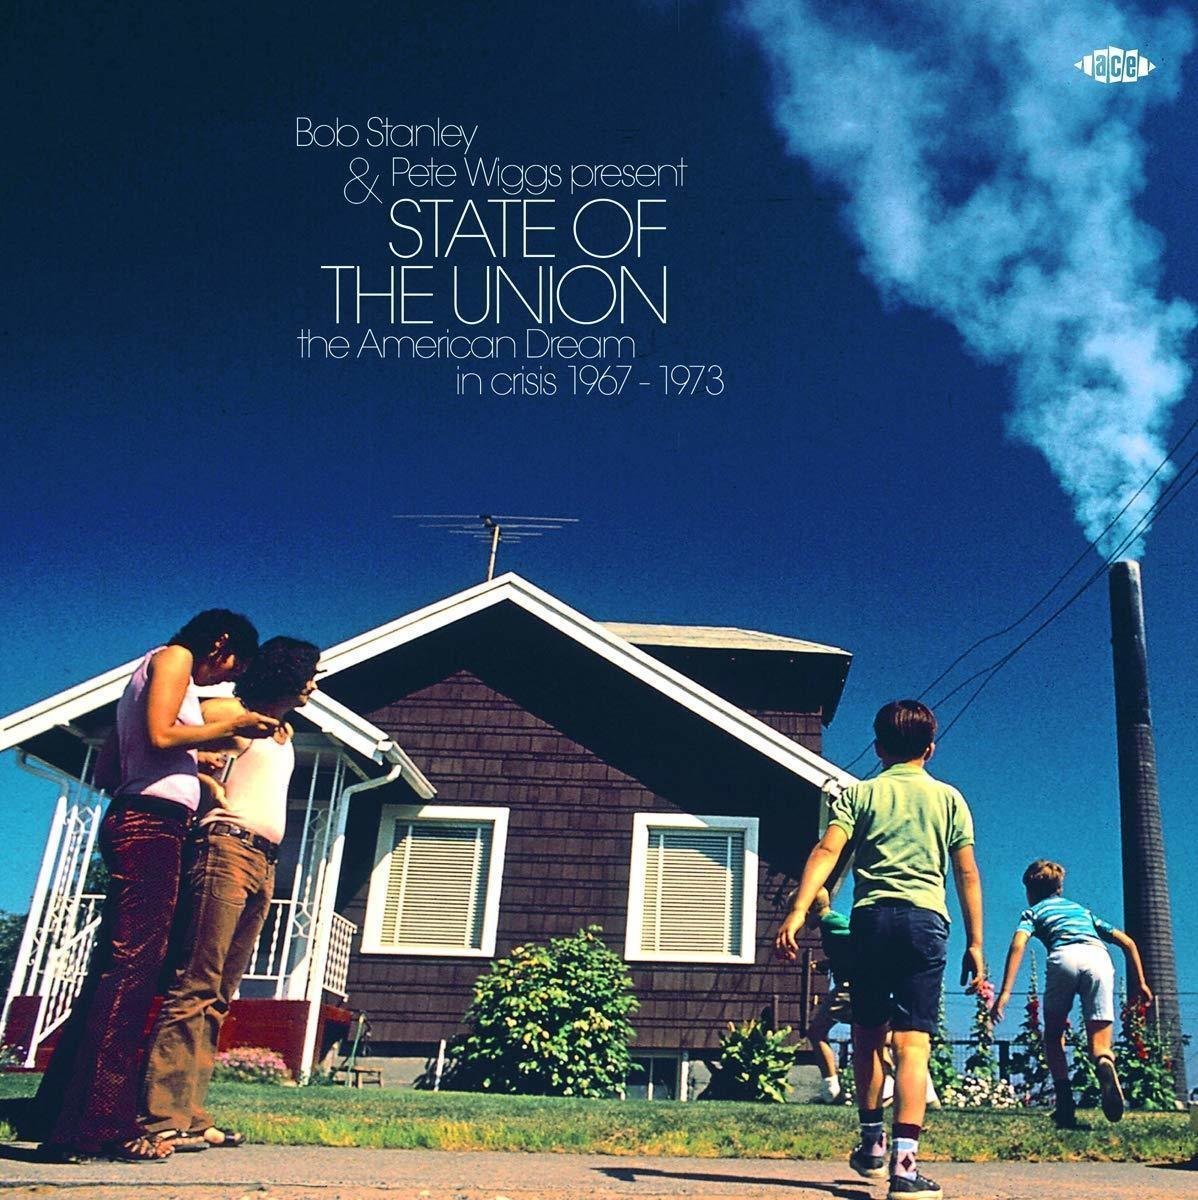 Disque vinyle Various Artists - State Of The Union - Bob Stanley & Pete Wiggs Present (2 LP)